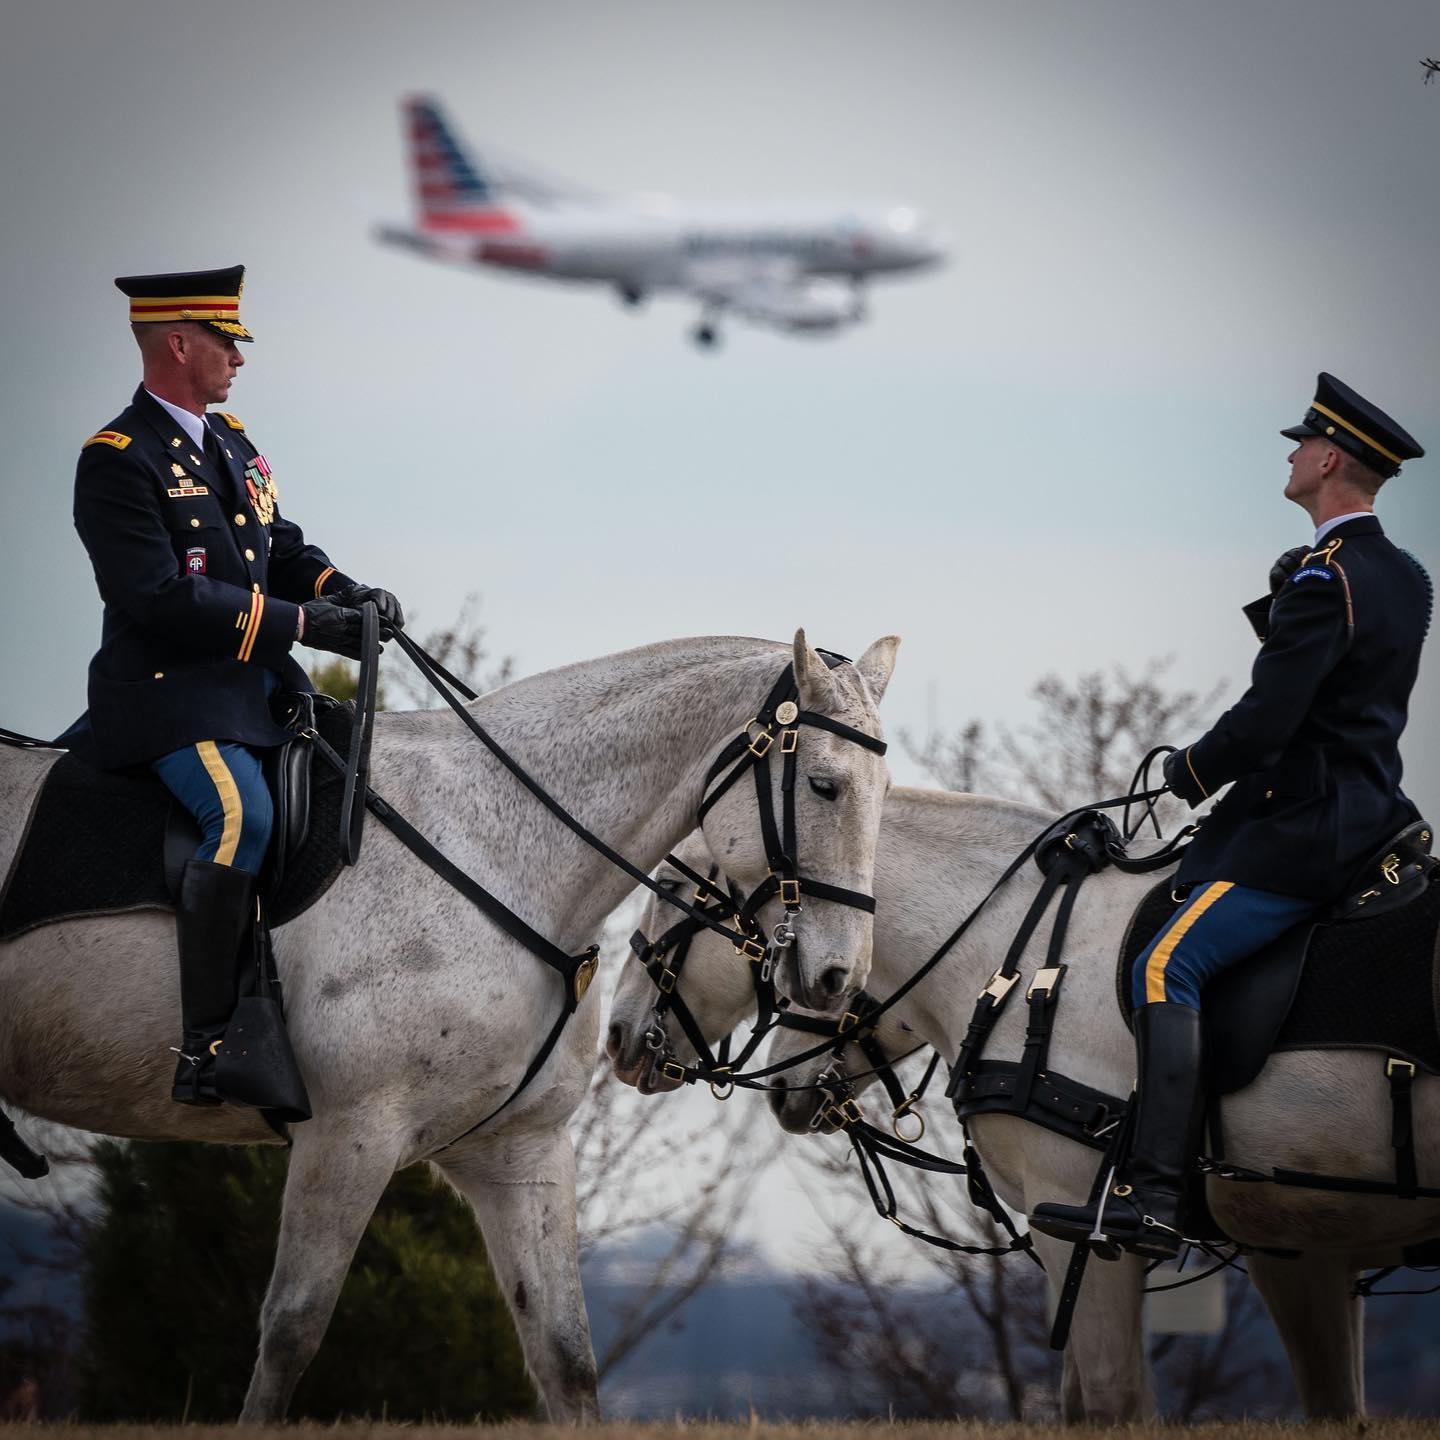 I don’t normally post photos of the military taken between services. But these were taken on one of the first services I did with Scott. The angle was just right to catch the horses, and the planes landing at National Airport. One airline even used one of these photos in a Memorial Day tweet a few years ago.